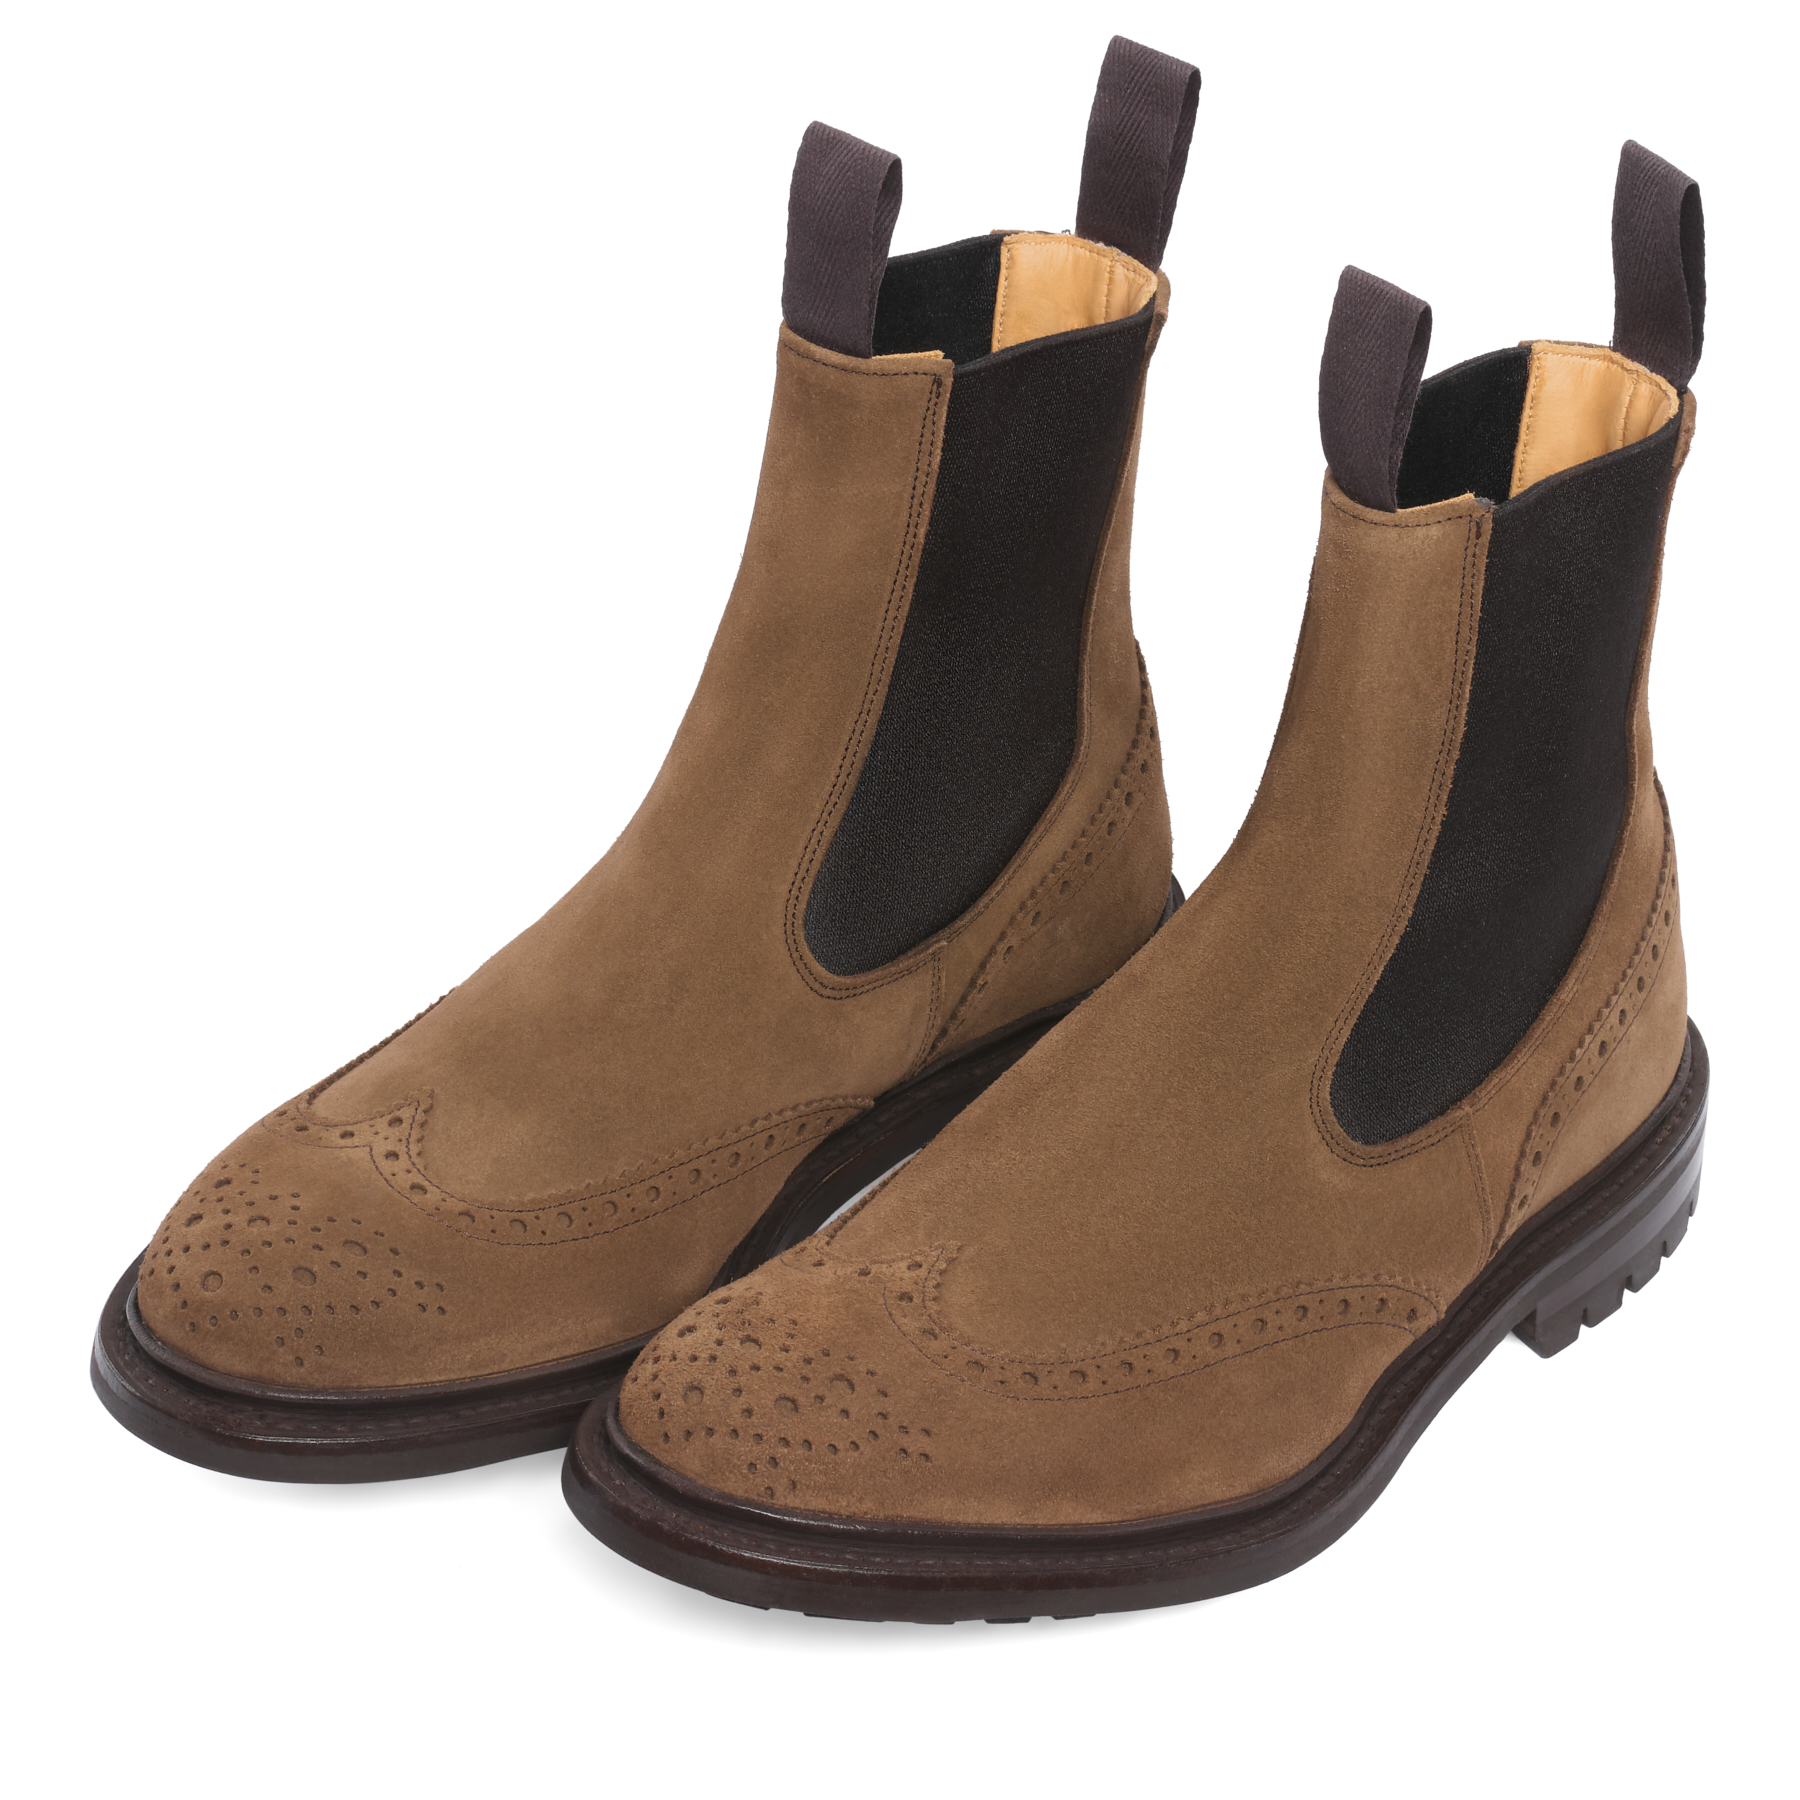 "Henry" Suede Slip-On Chelsea Boots